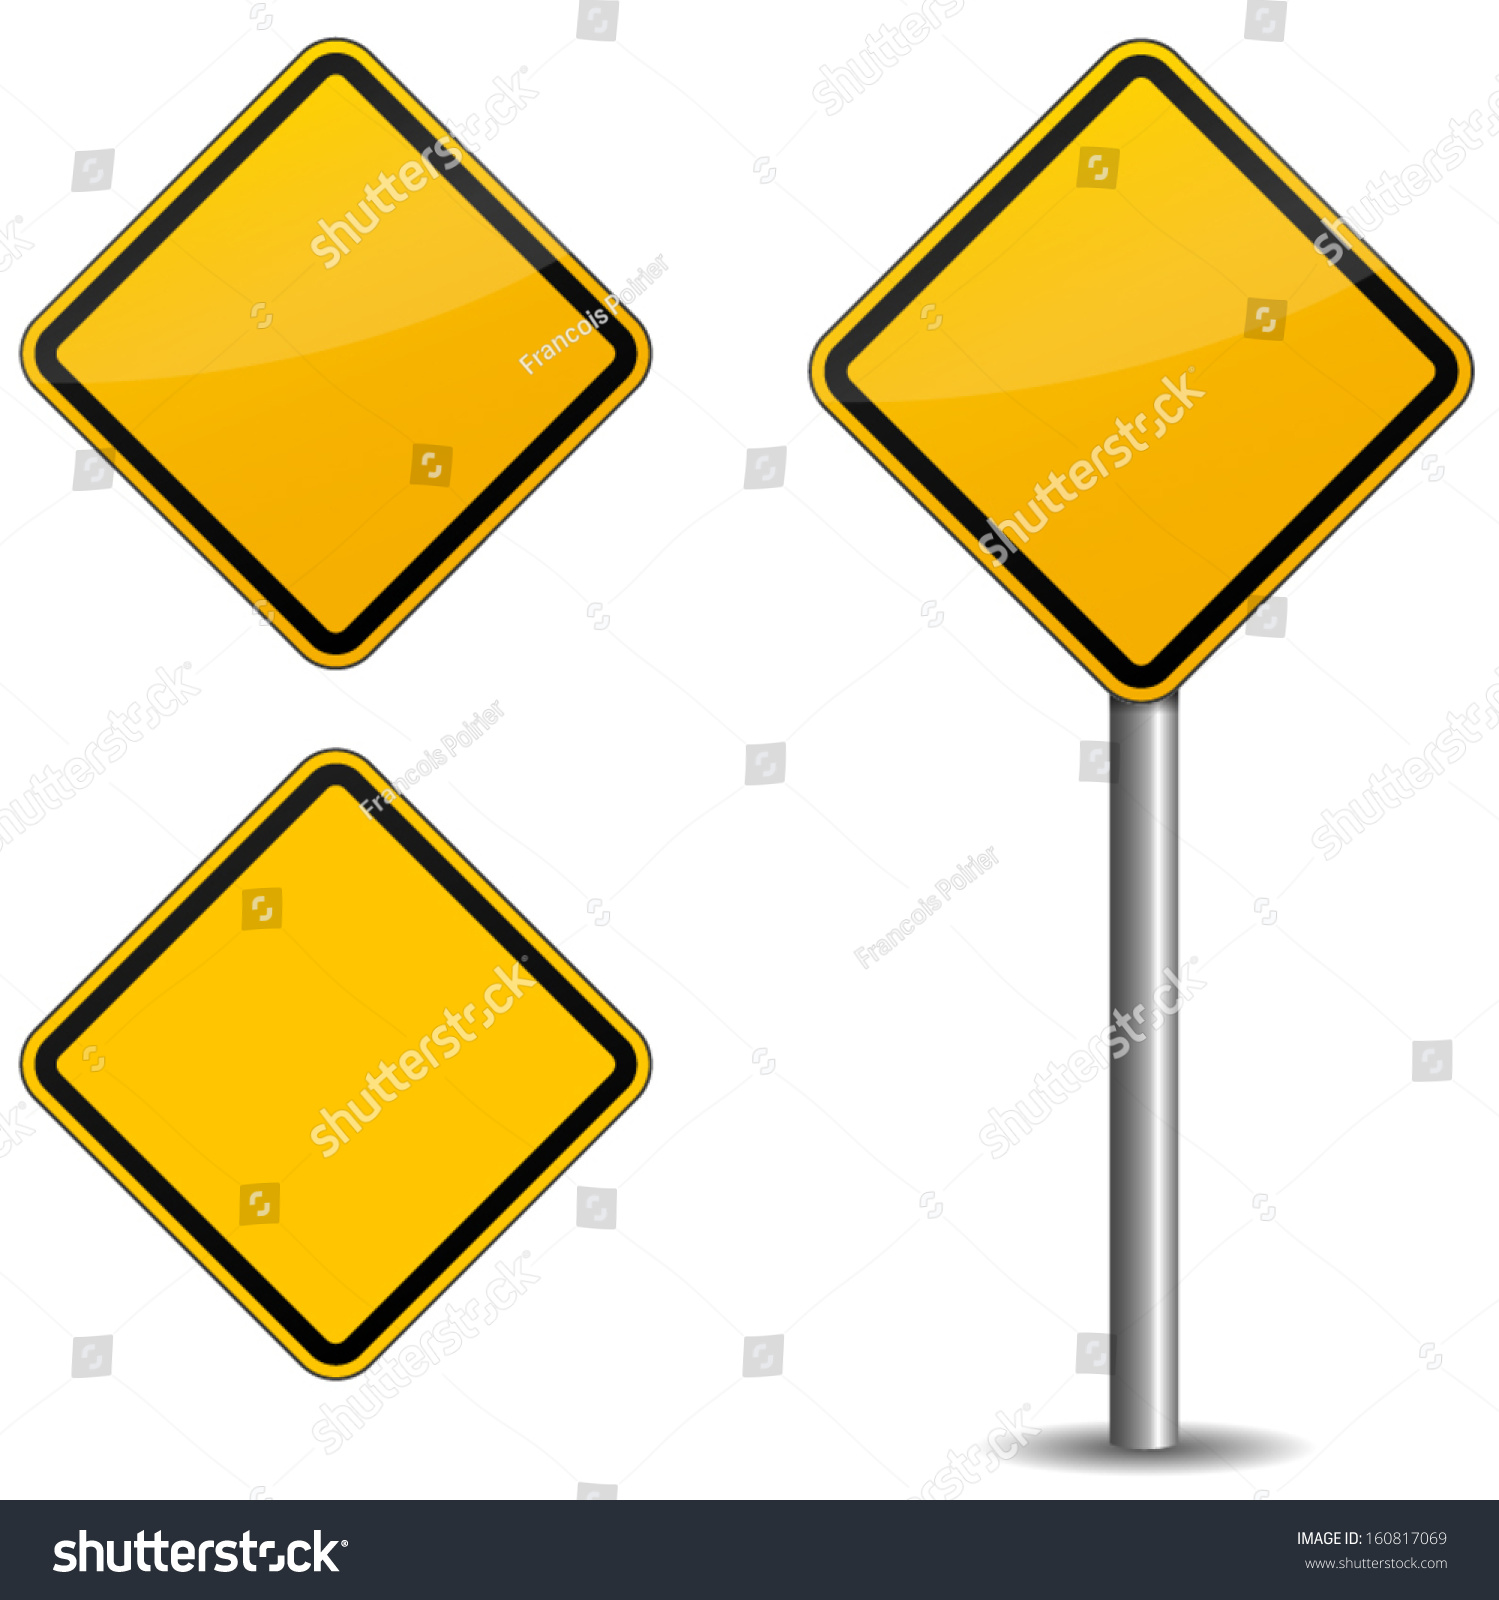 Road Sign Stock Vector (Royalty Free) 160817069 - Shutterstock